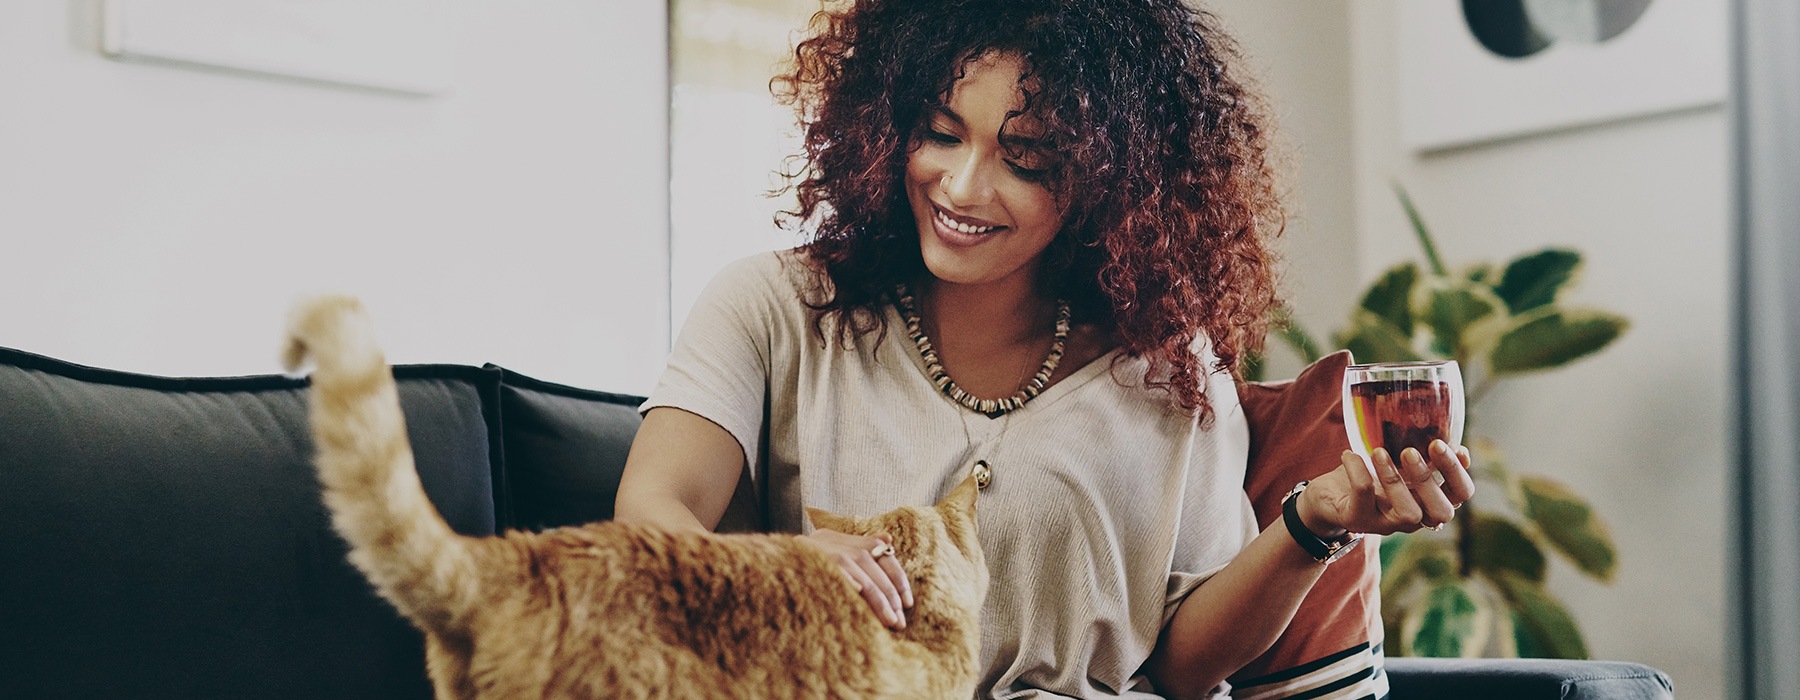 lifestyle image of a woman petting her cat